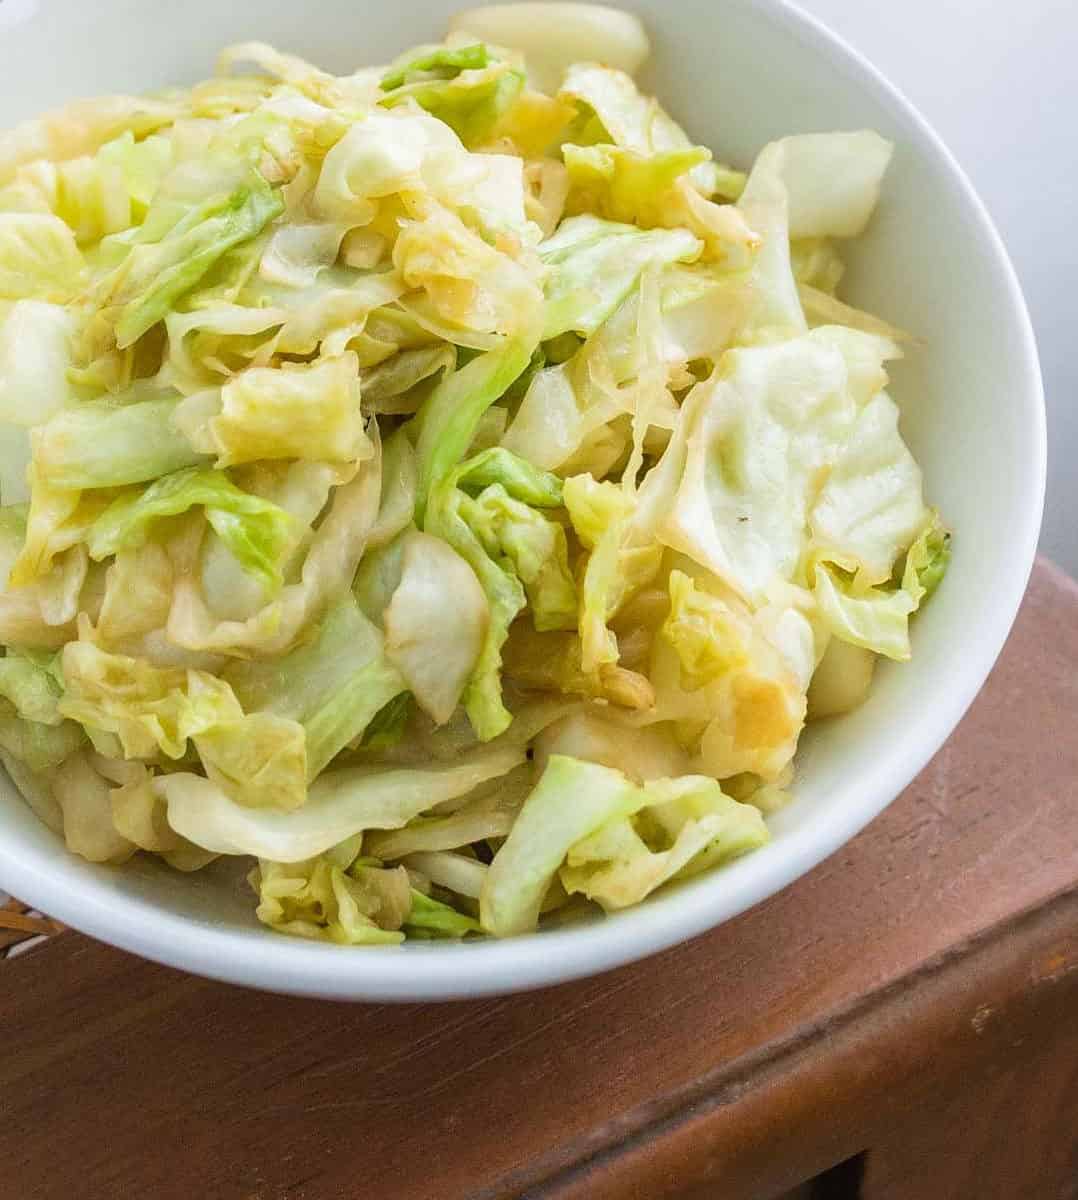  Savor the crunch with this vegan fried celery and cabbage recipe that packs a punch of flavor with every bite.